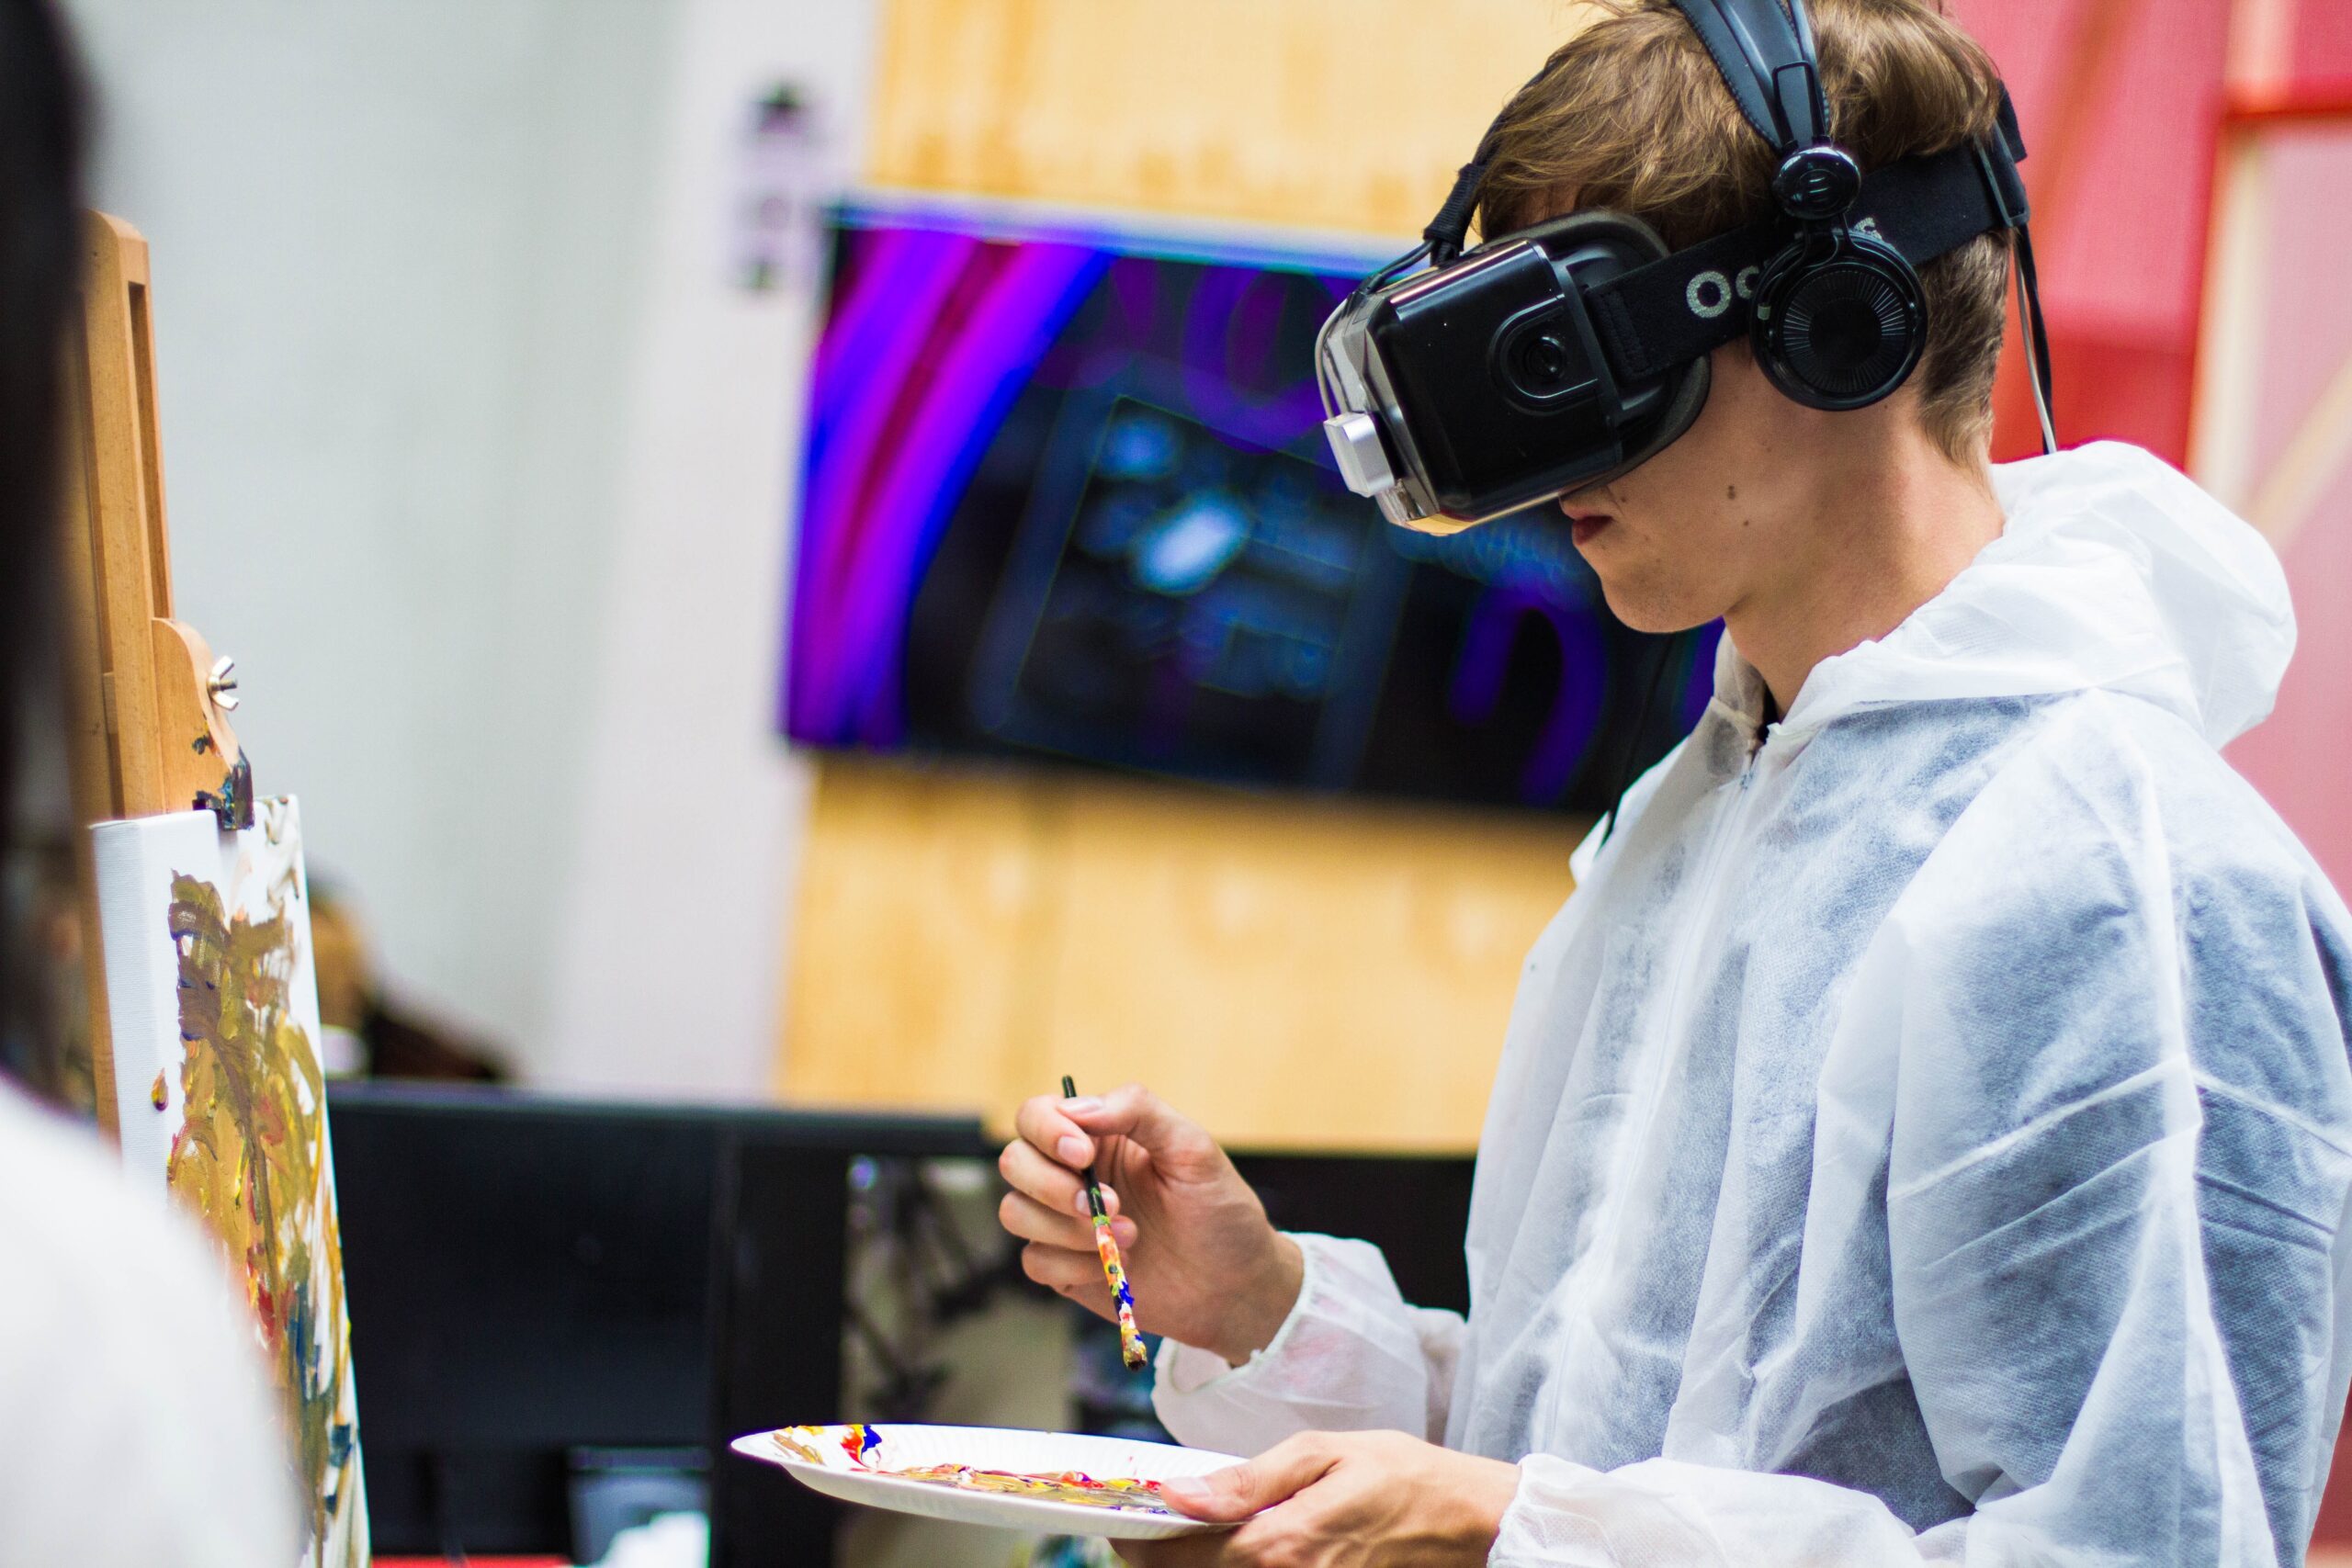 Art student uses Oculus VR in art university class. Photo by Billetto Editorial on Unsplash